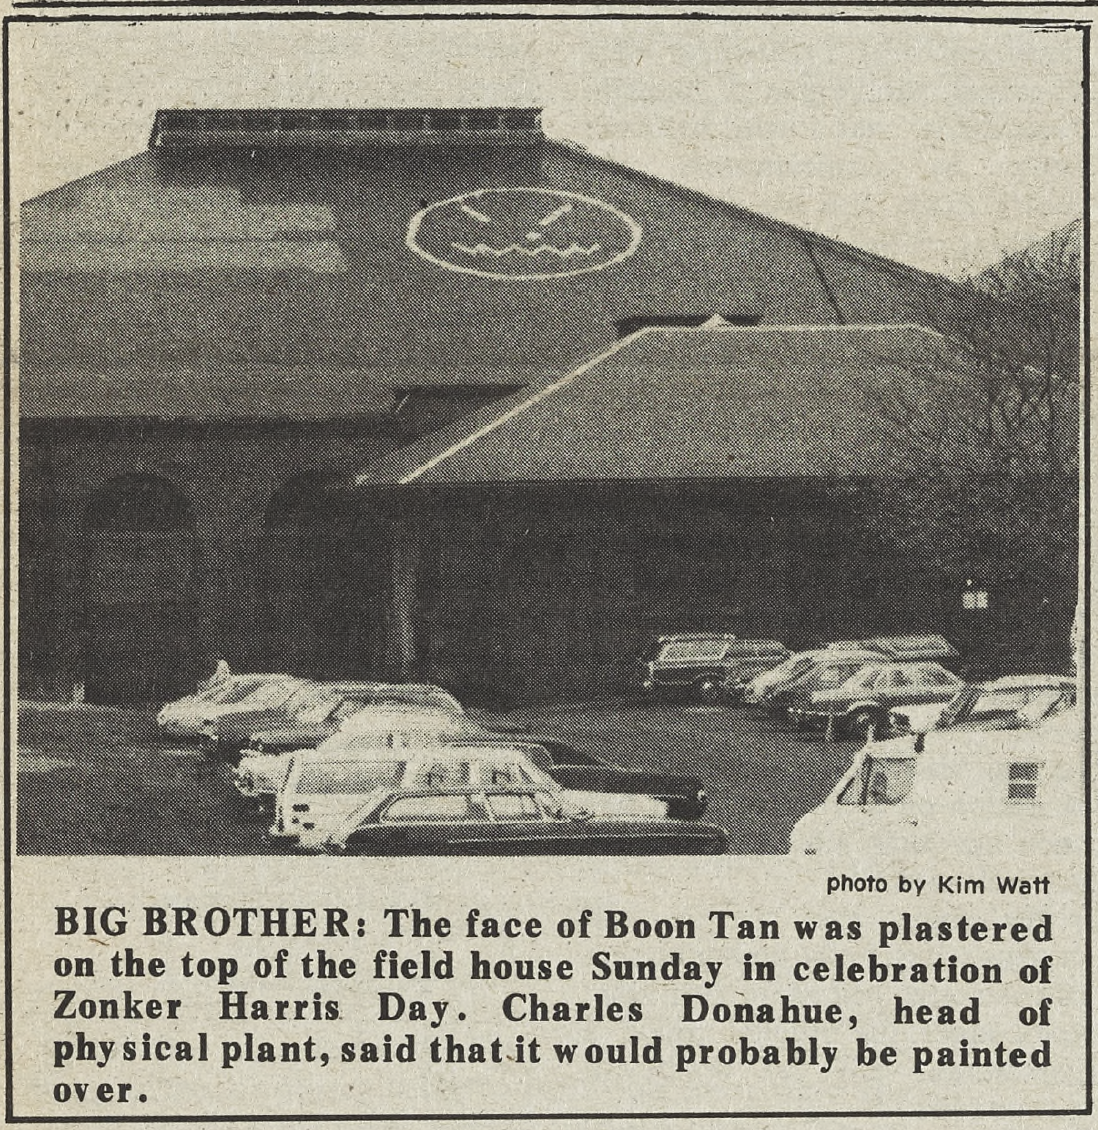 Largest display of the Boon Tan face yet at Field House (where Usdan University Center currently stands). The caption reads, "BIG BROTHER: The face of Boon Tan was plastered
on the top of the field house Sunday in celebration of Zonker Harris Day. Charles Donahue, head of physical plant, said that it would probably be painted over."